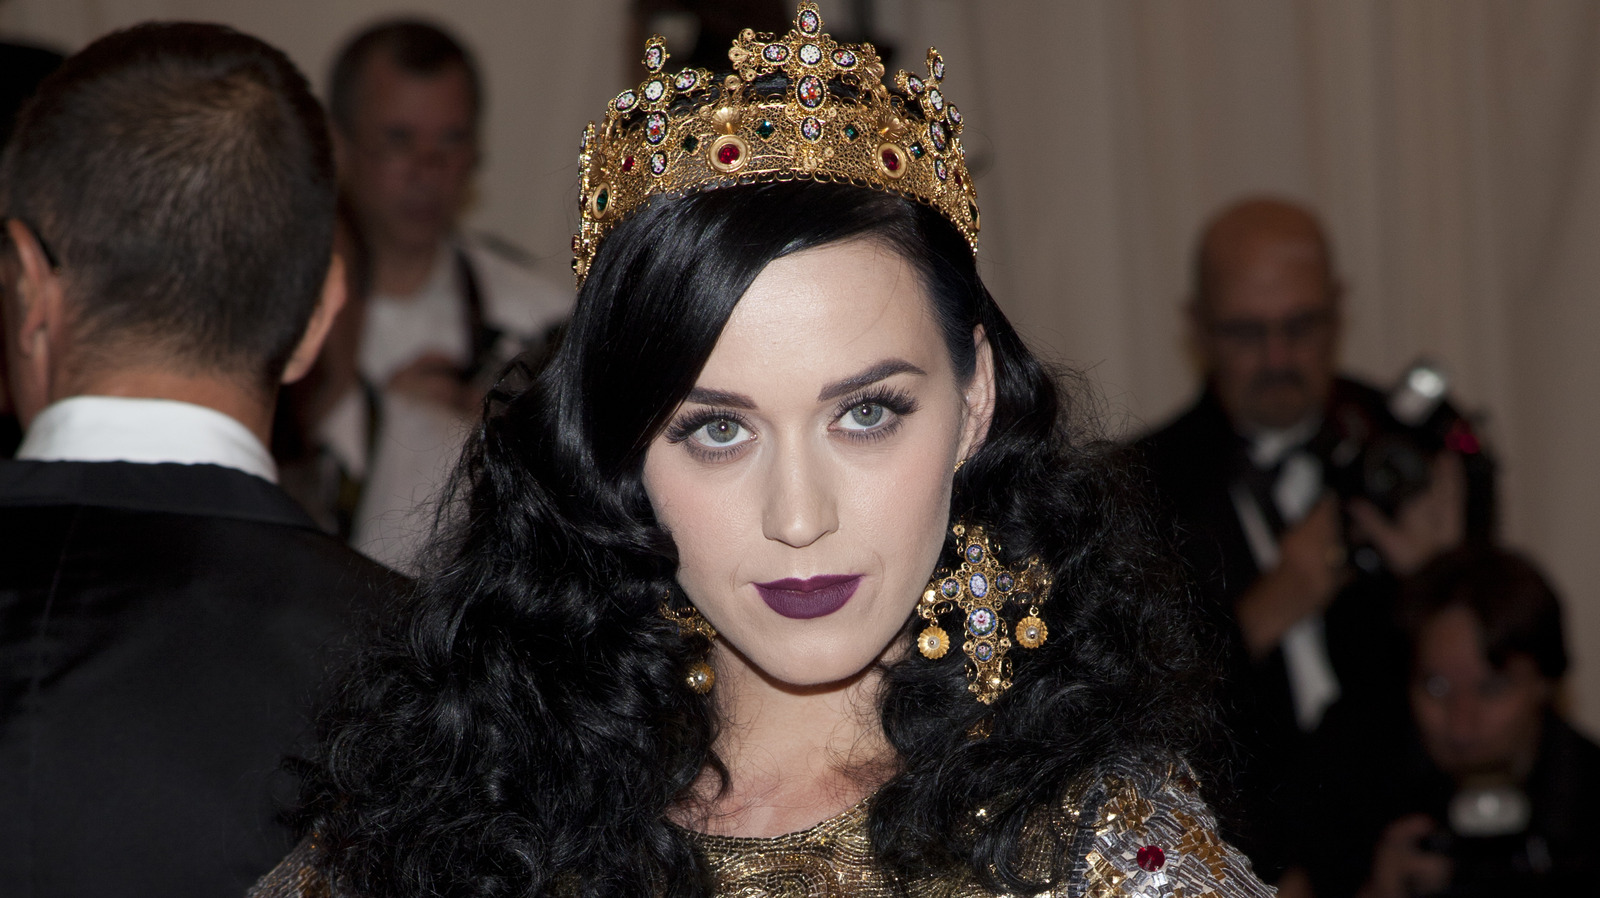 Katy Perry's History With The Royal Family - News and Gossip